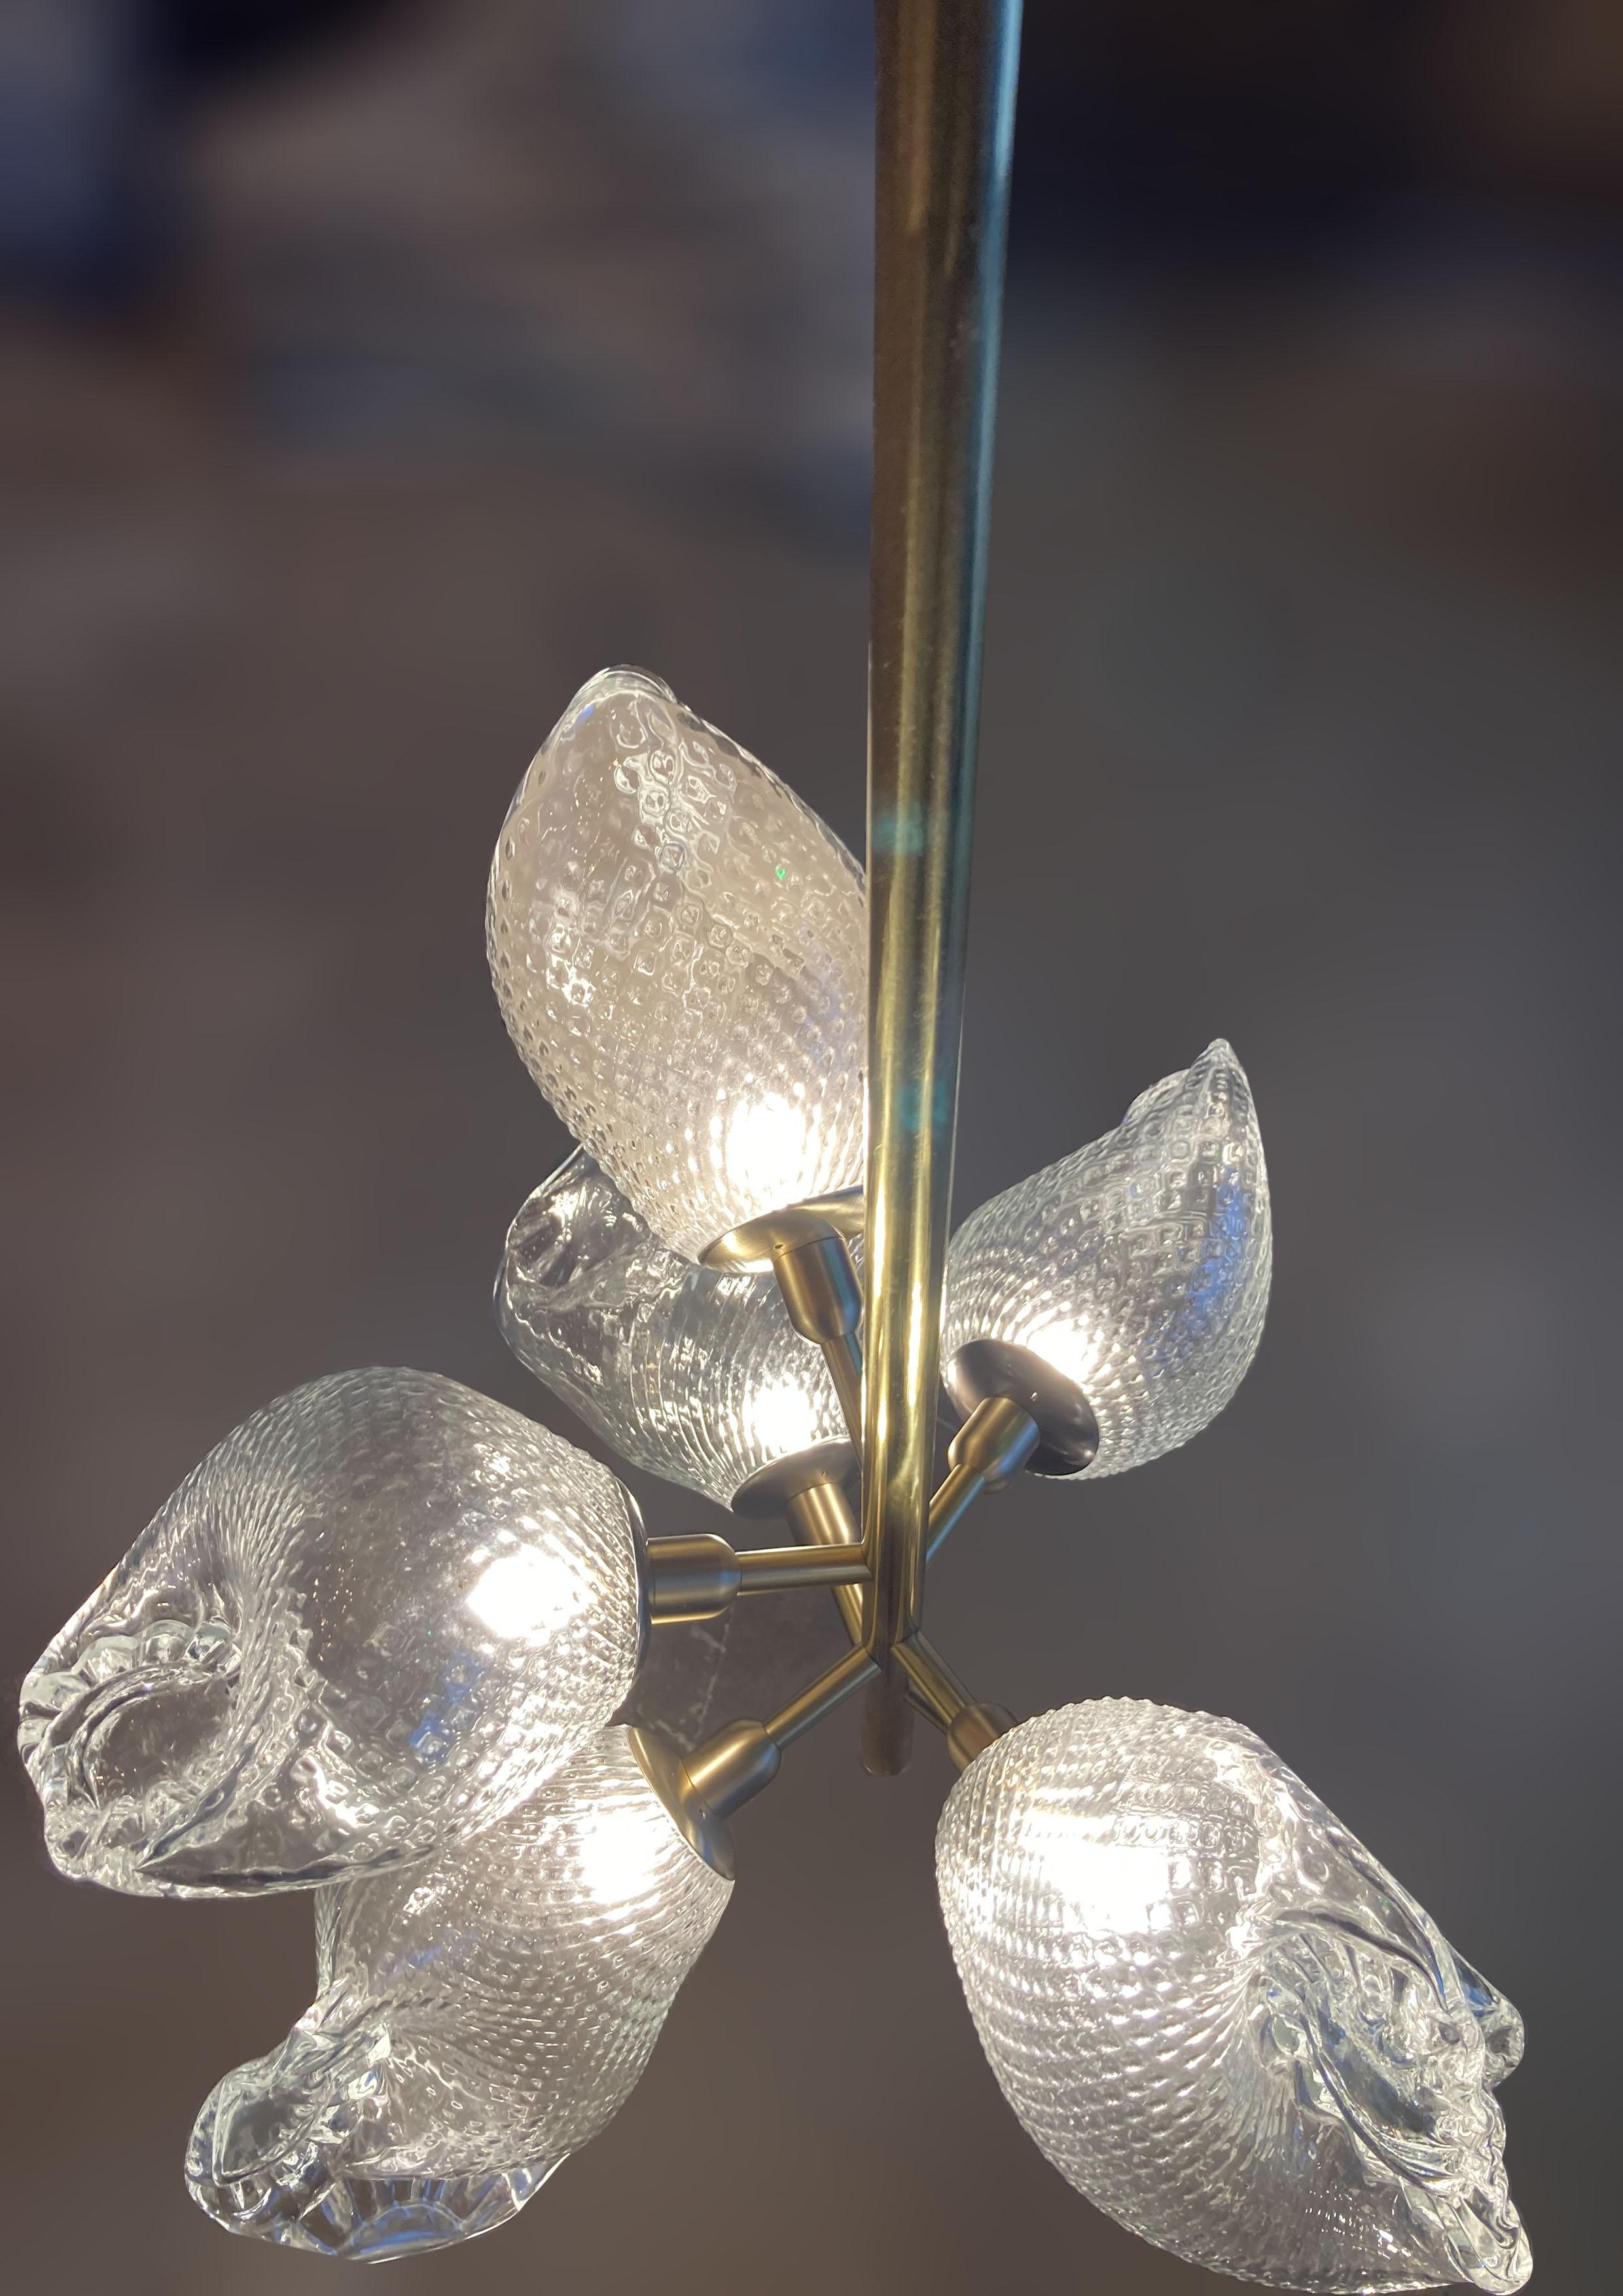 nightingale collection - pendant lamp by Sema Topaloglu In Excellent Condition For Sale In Istanbul, 34